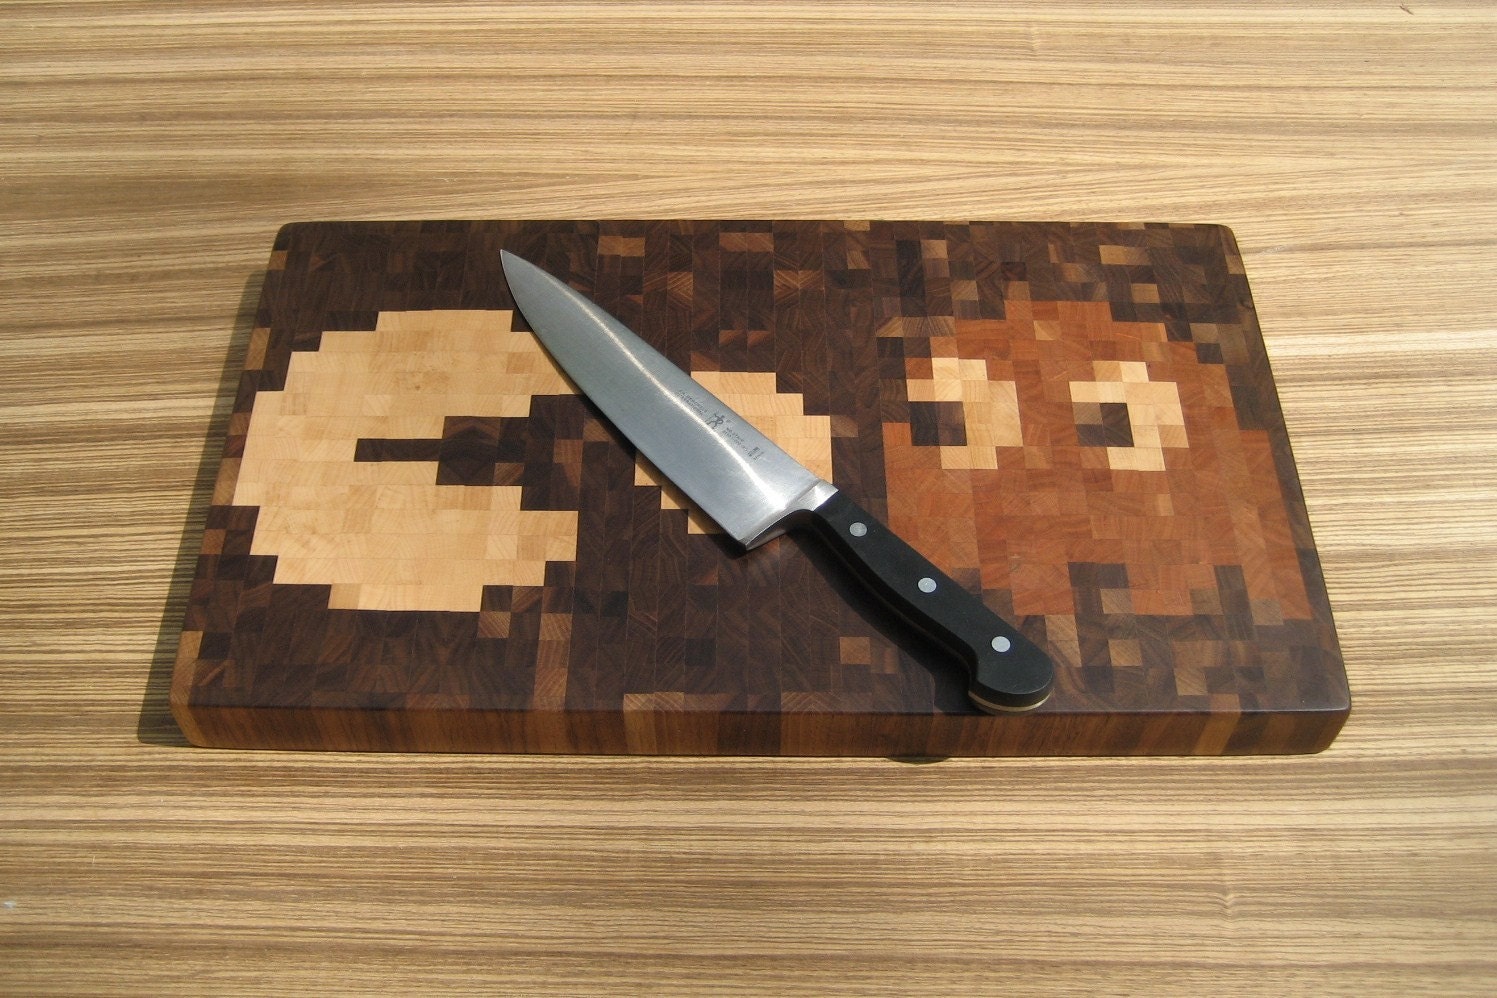 PacMan Cutting Board (With Blinky (or possibly Clyde))